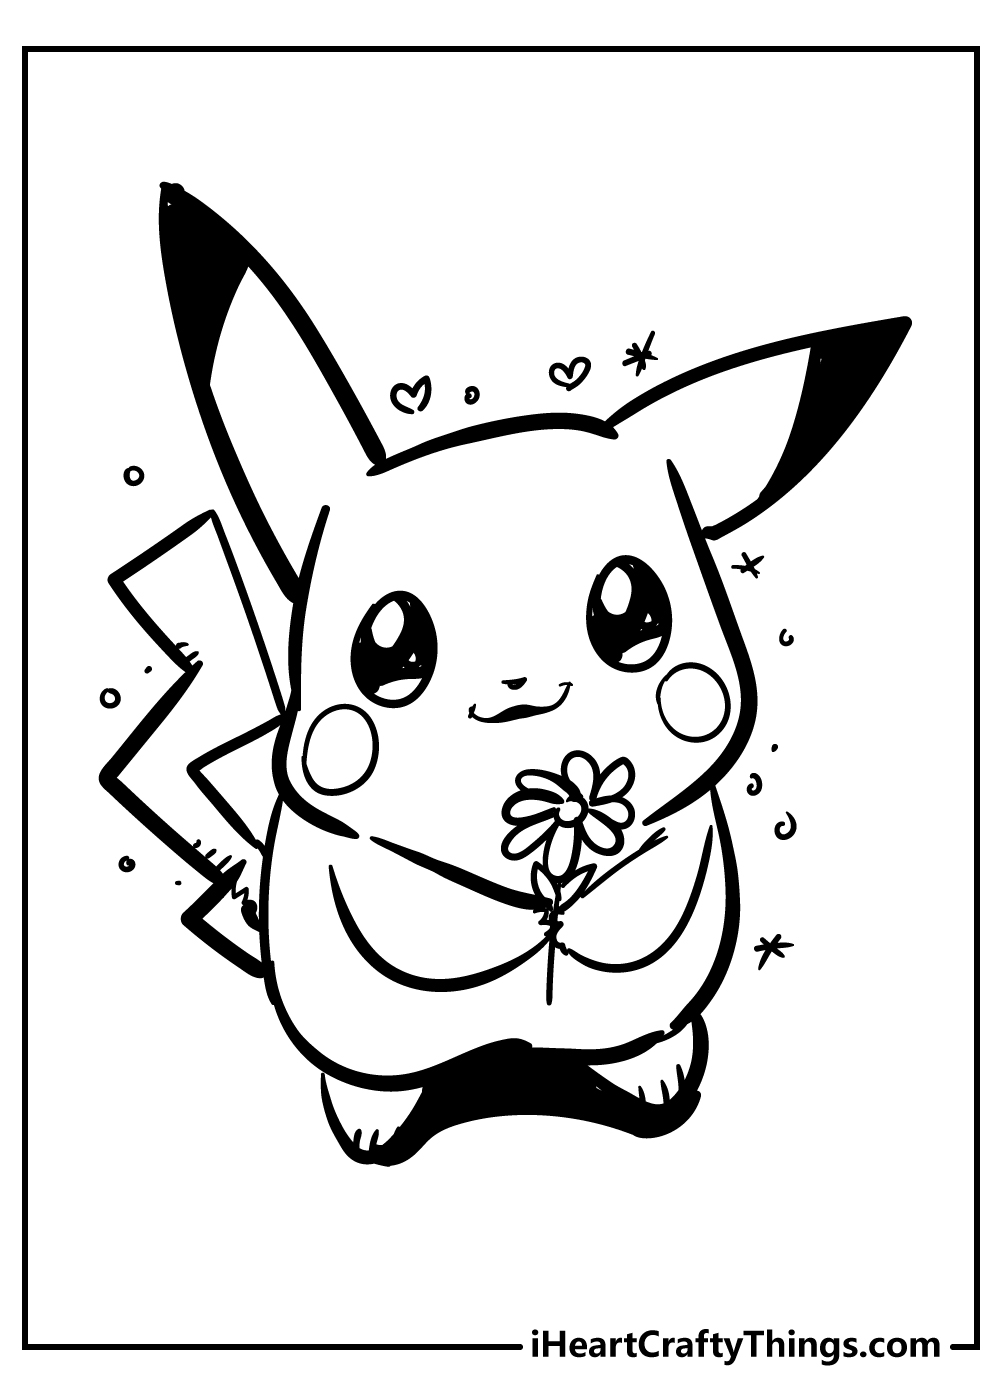 Pikachu coloring pages for kids free download